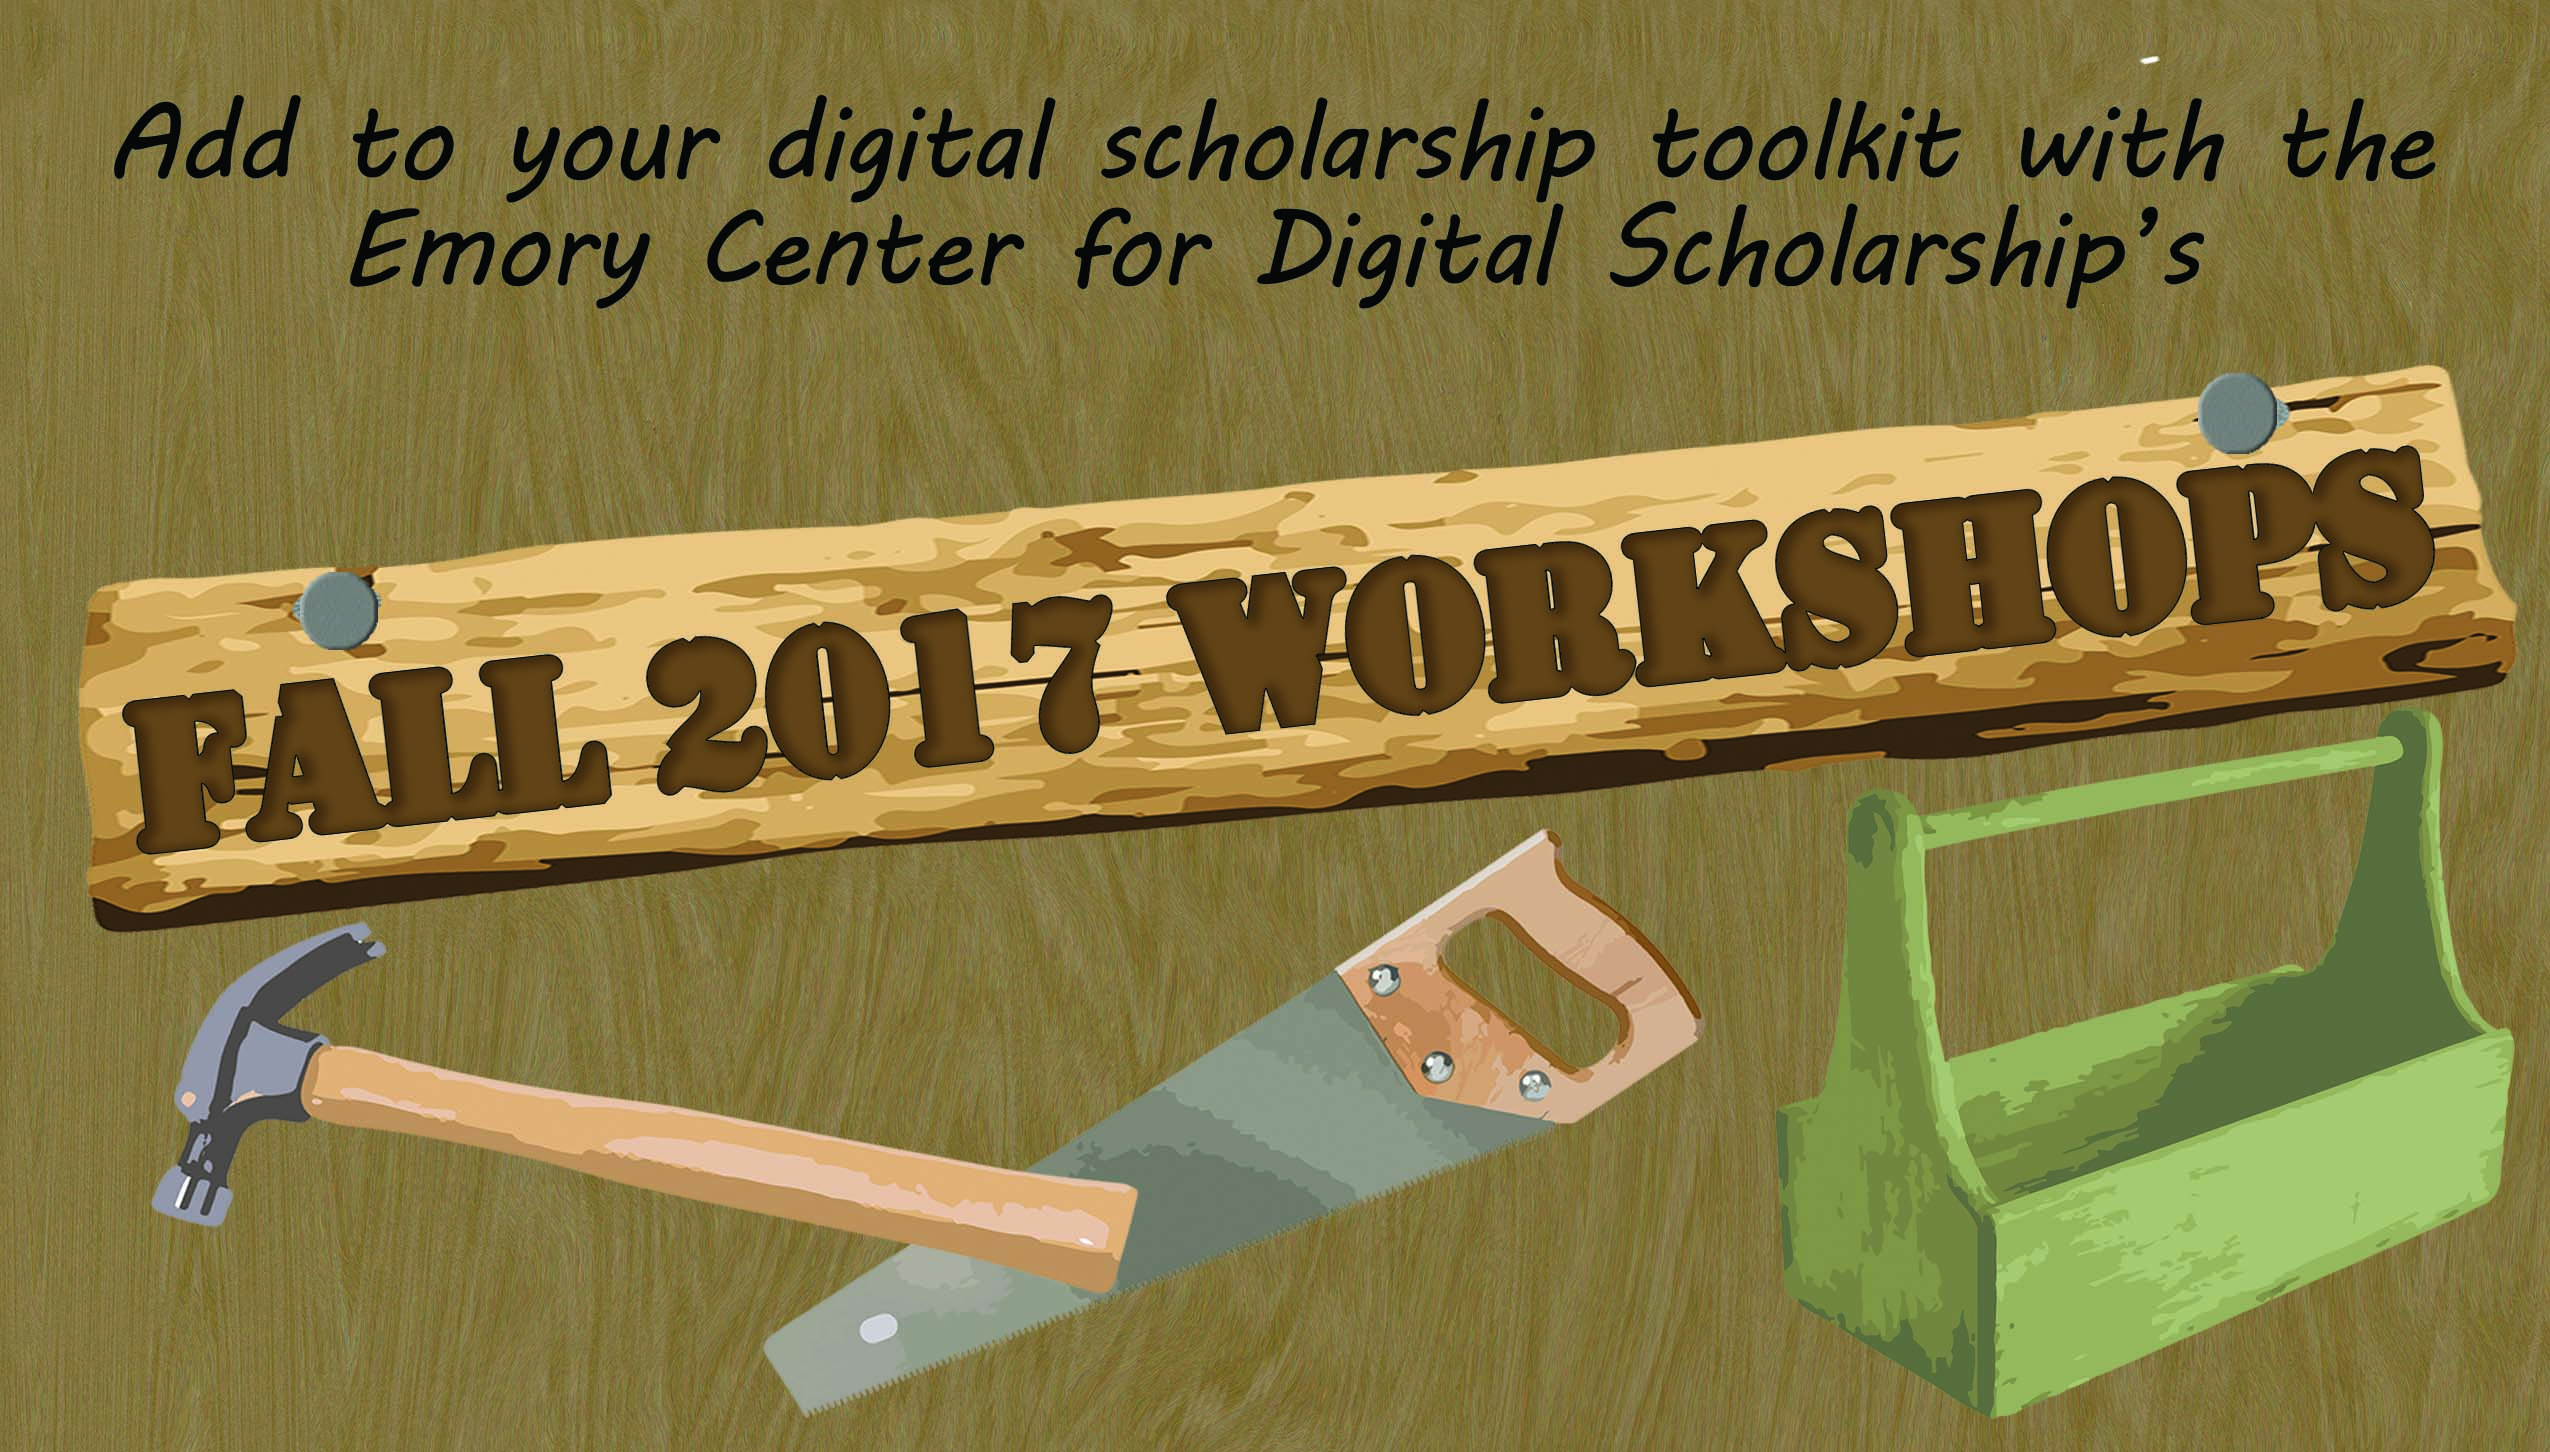 Text: "Add to your digital scholarship toolkit with the ECDS Fall 2017 workshops." on a wooden background with a hammer, saw, and toolbox.